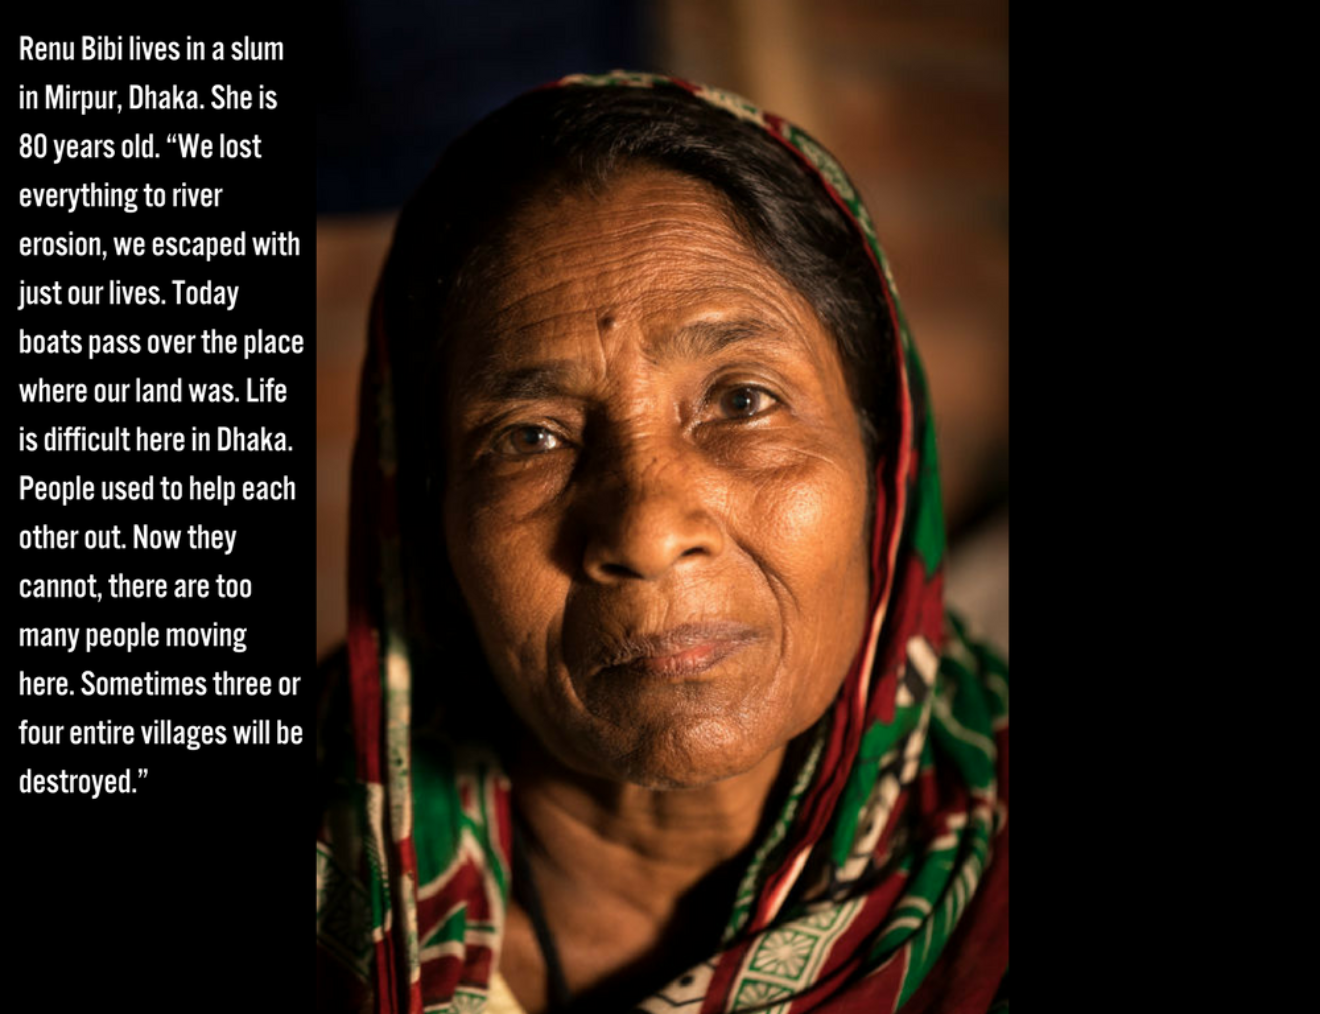 Renu Bibi Lives In A Slum In Mirpur Dhaka  She Is 80 Years Old “ We Lost Everything To River Erosion We Escaped With Just Our Lives  Today Boats Pass Over The Place Where Our Land Was  Life Is Difficult Here In Dha